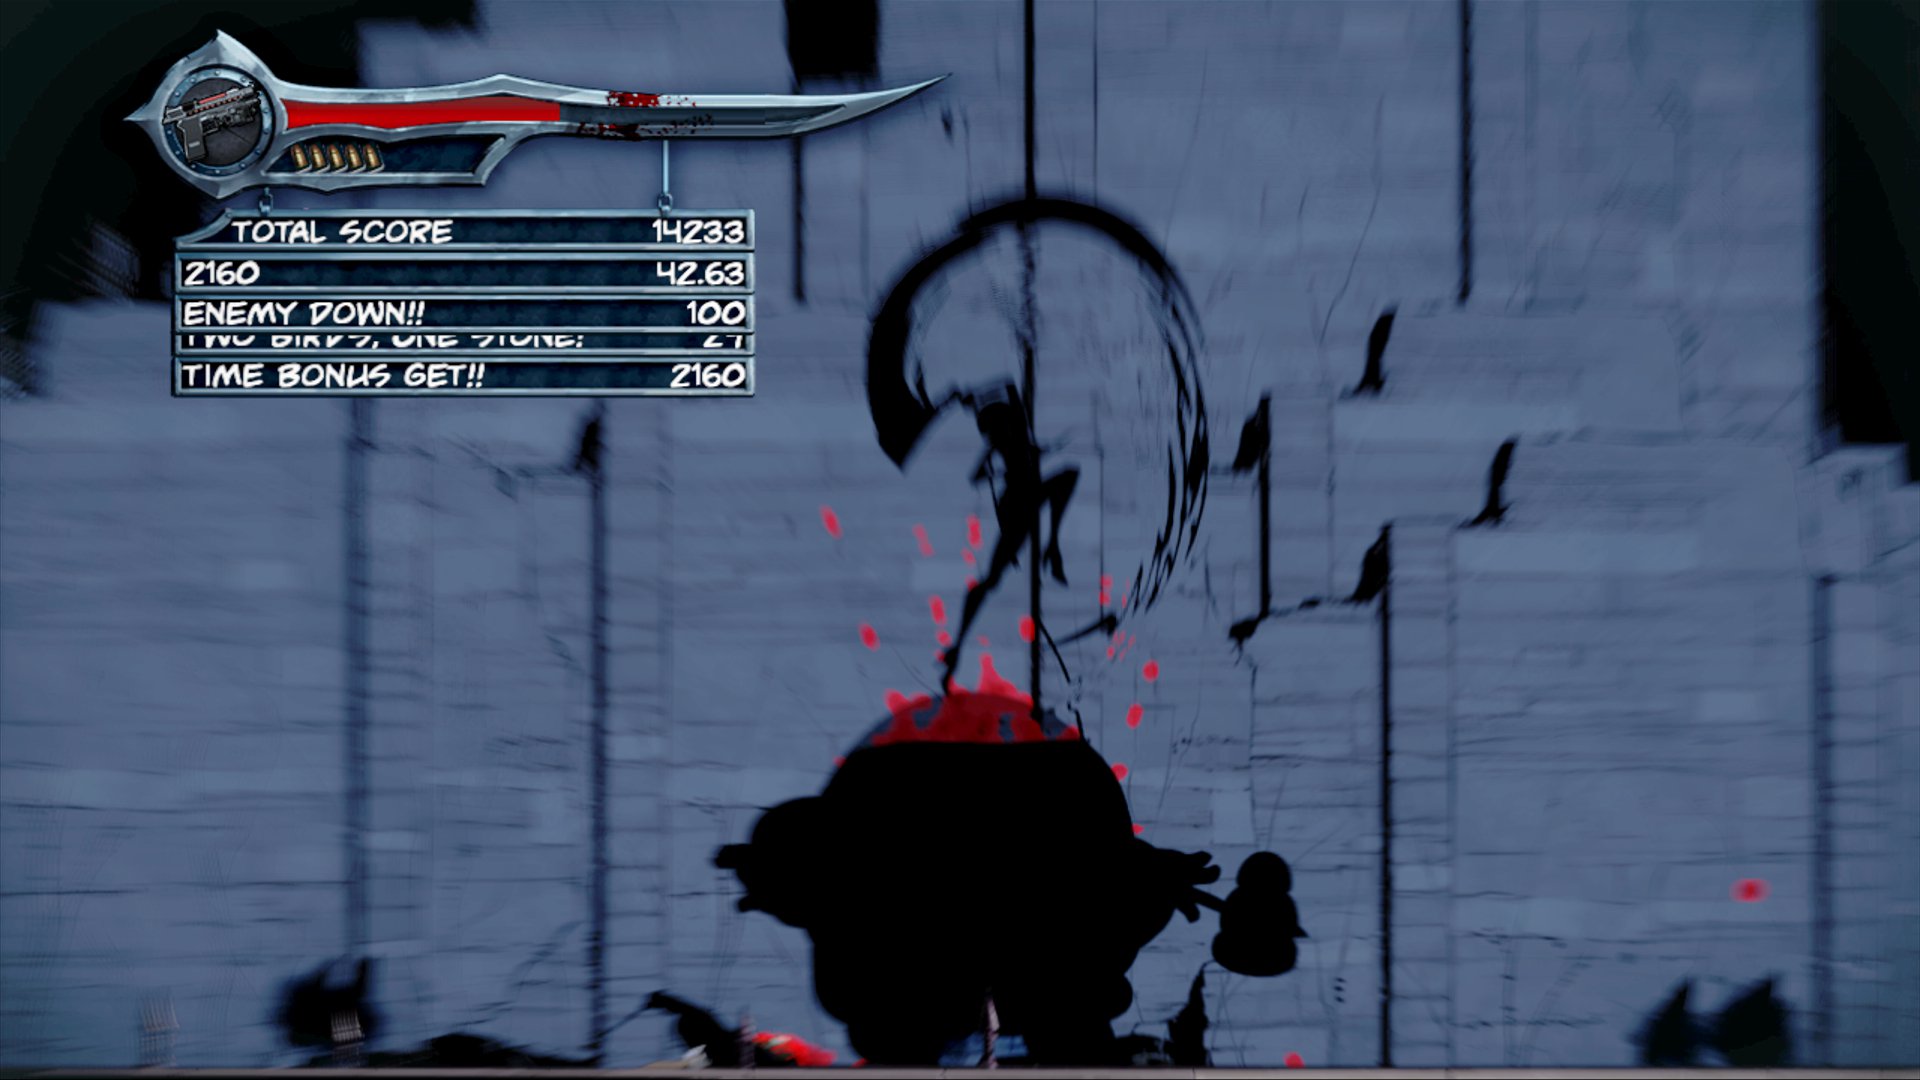 BloodRayne: Betrayal splattering attendees at PAX, showering fans with developer diaries